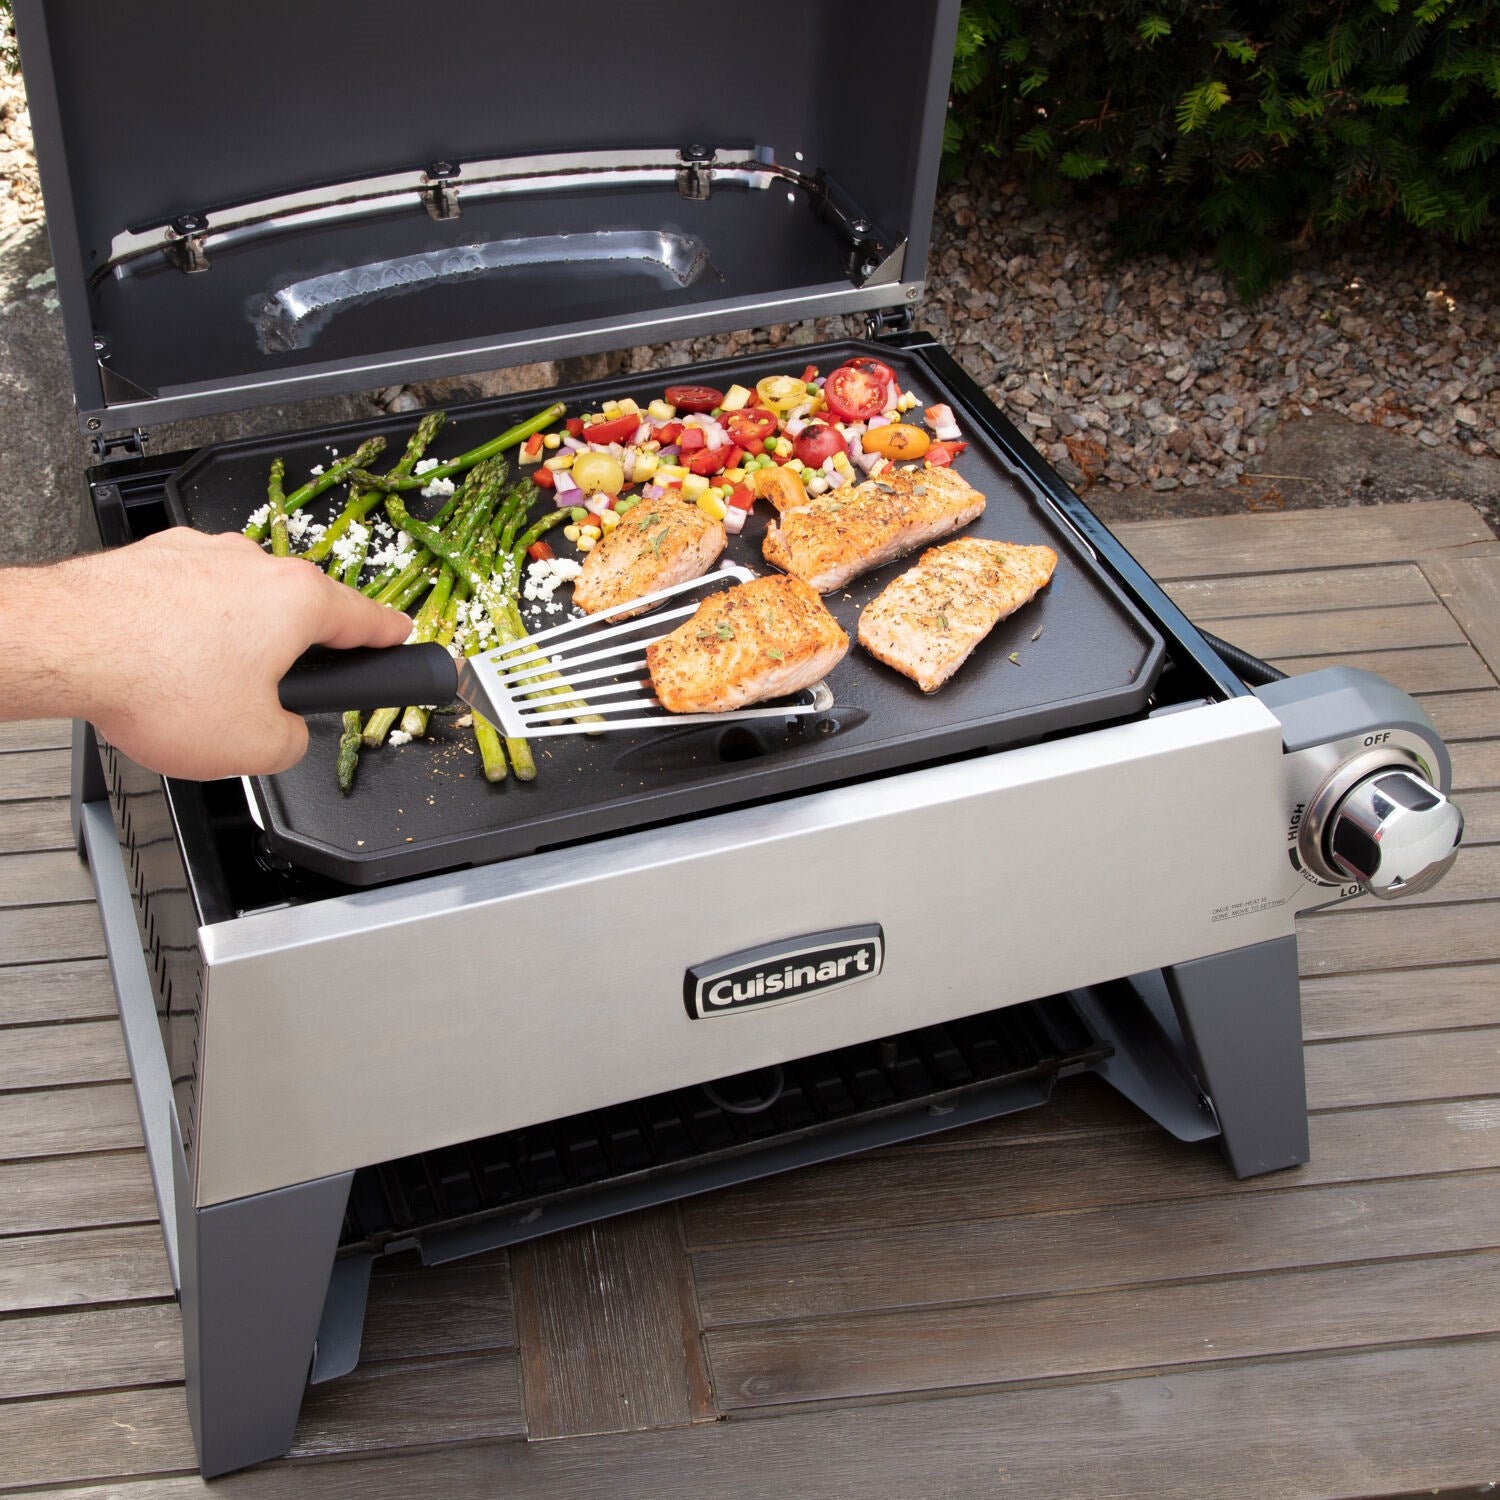 Cuisinart Grill - 3 in 1 Outdoor Pizza Oven/Griddle/Grill, 15,000 BTU, Accessories Incl - CGG-403